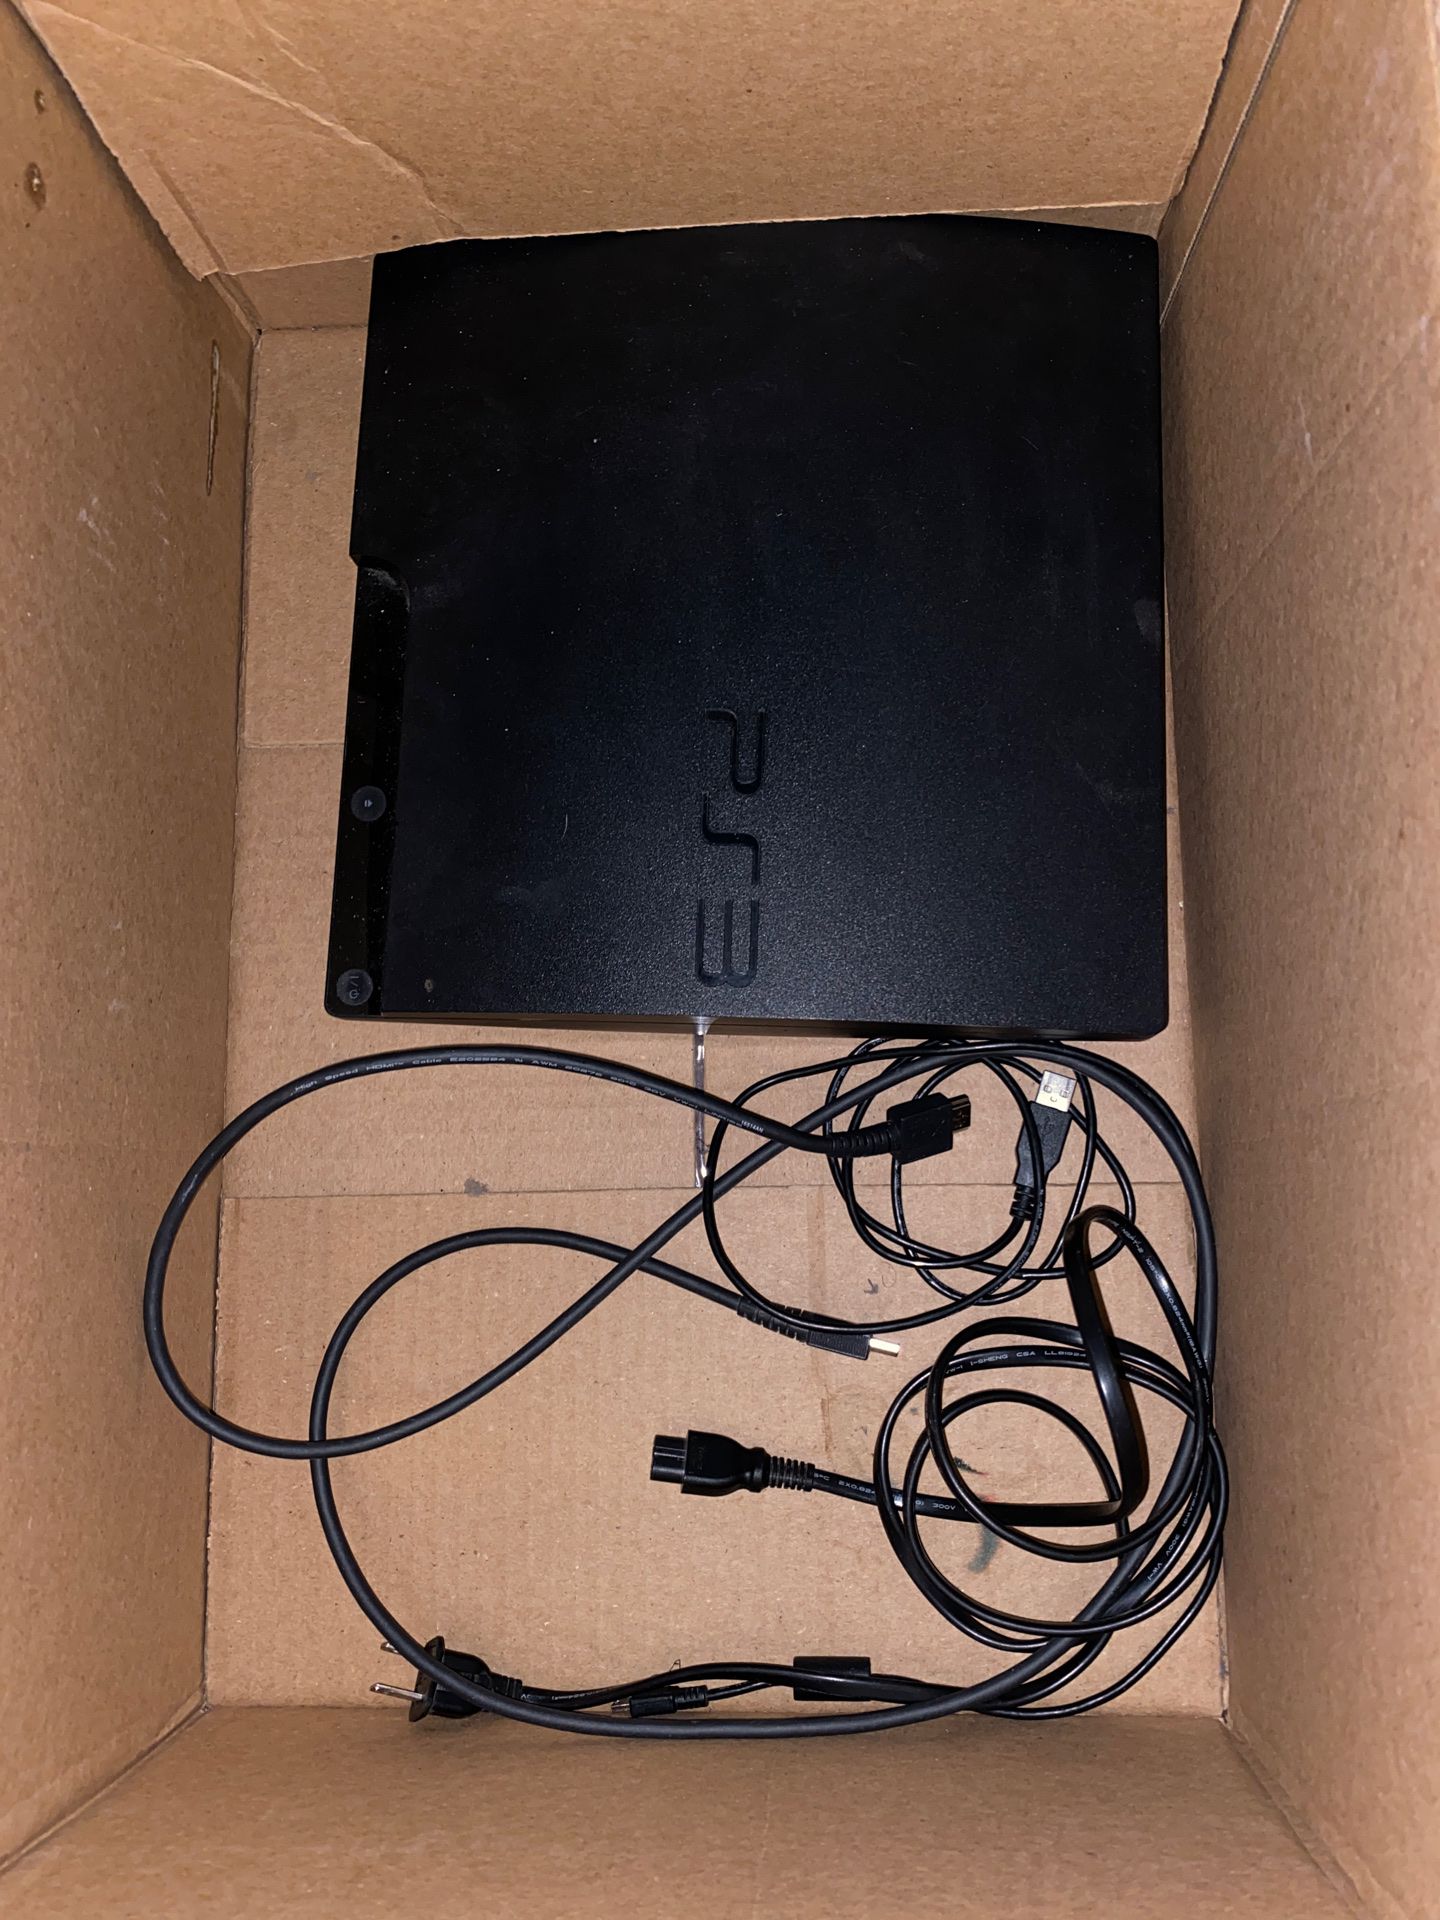 Ps3 with controller and games